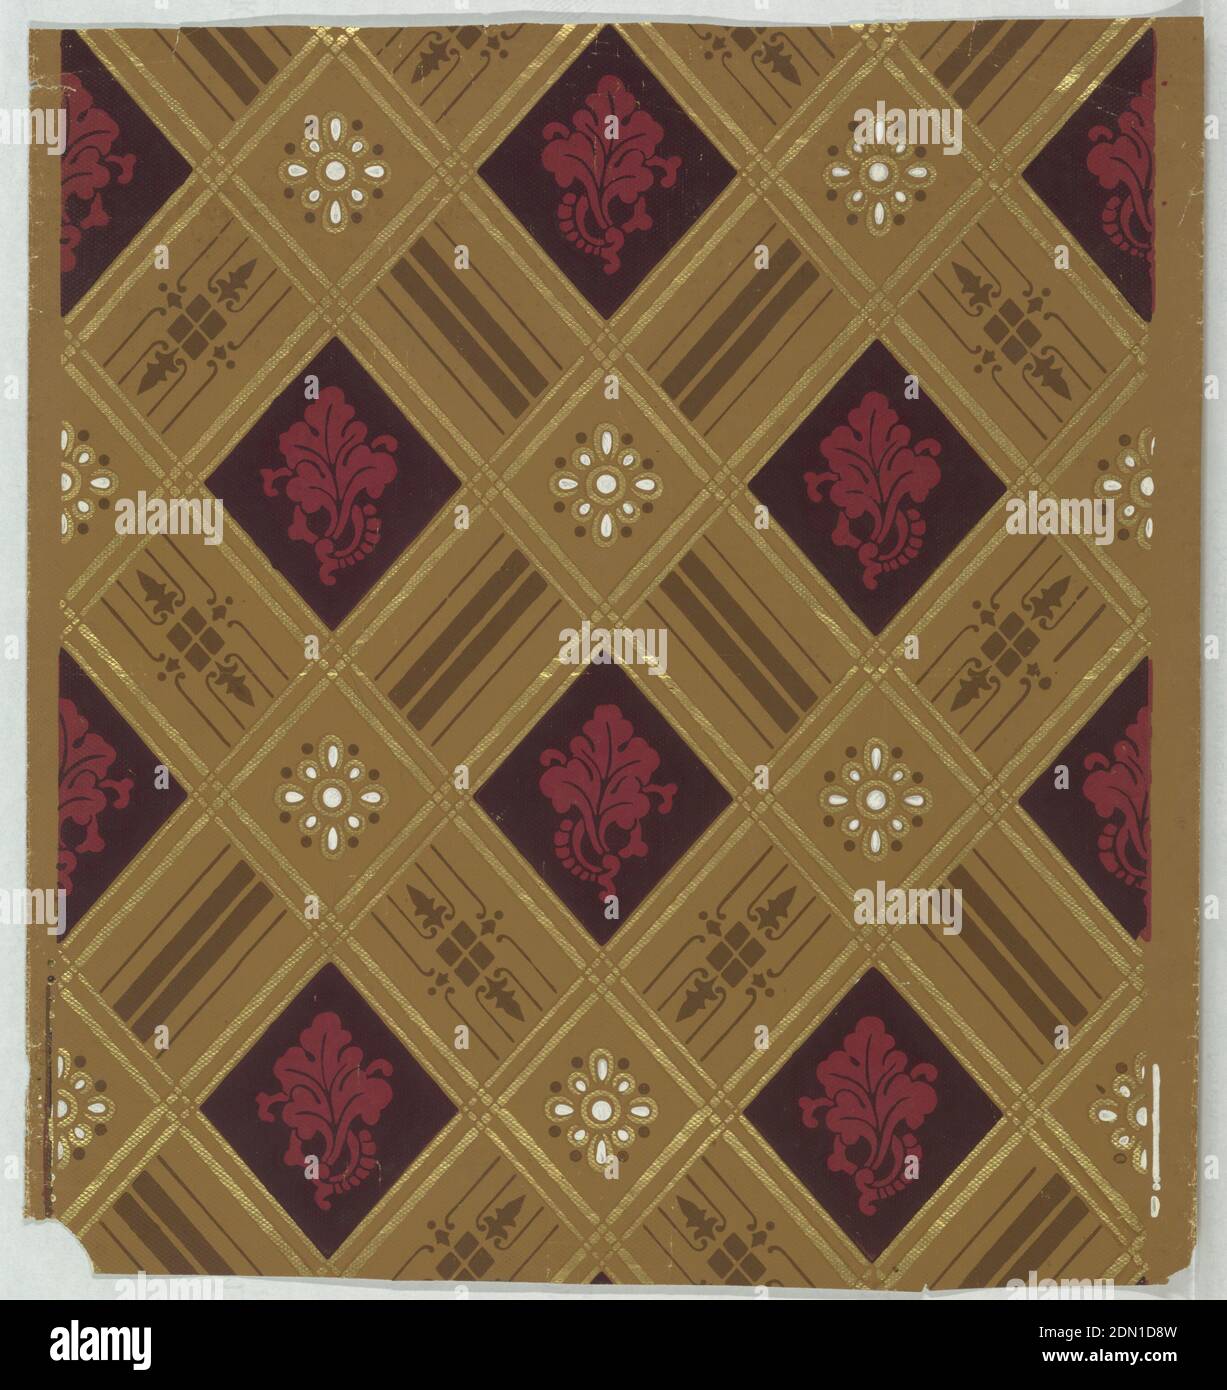 Sidewall, Machine-printed on continuous paper, On patterned tan ground, diagonal metallic gold trellis frames alternating stylized red cabbage leaf on black ground and metallic gold and shiny white stylized flower., 1875–90, Wallcoverings, Sidewall Stock Photo